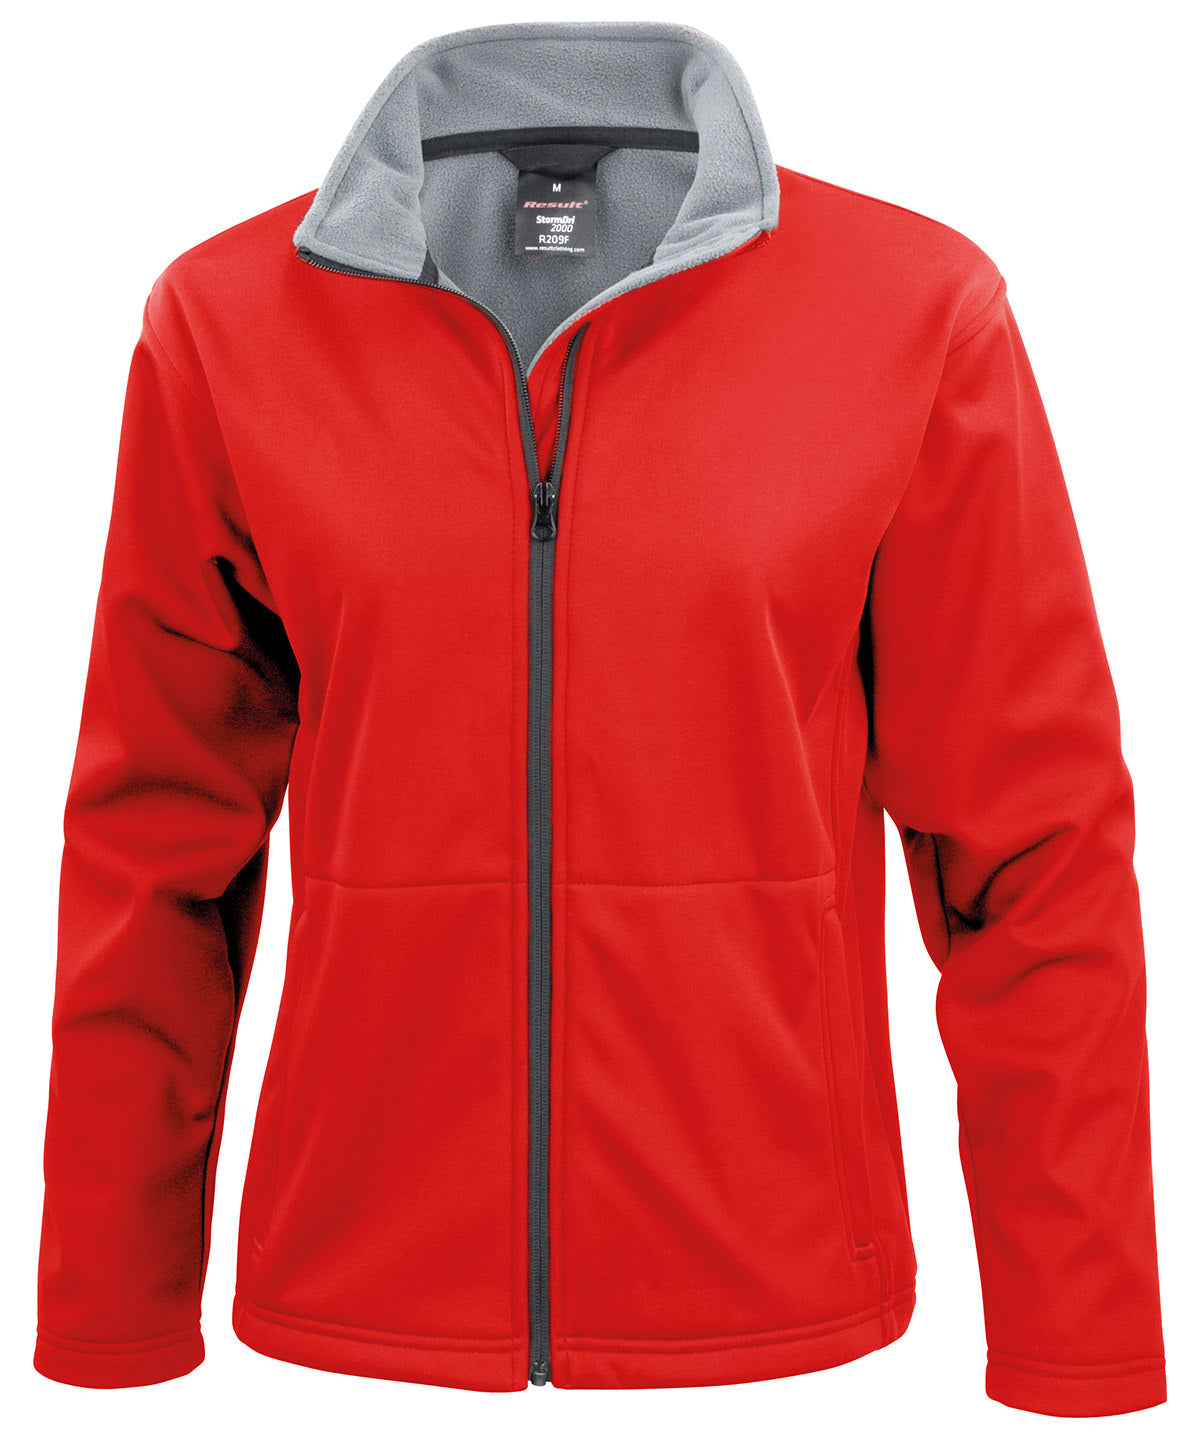 Result Womens Core softshell jacket